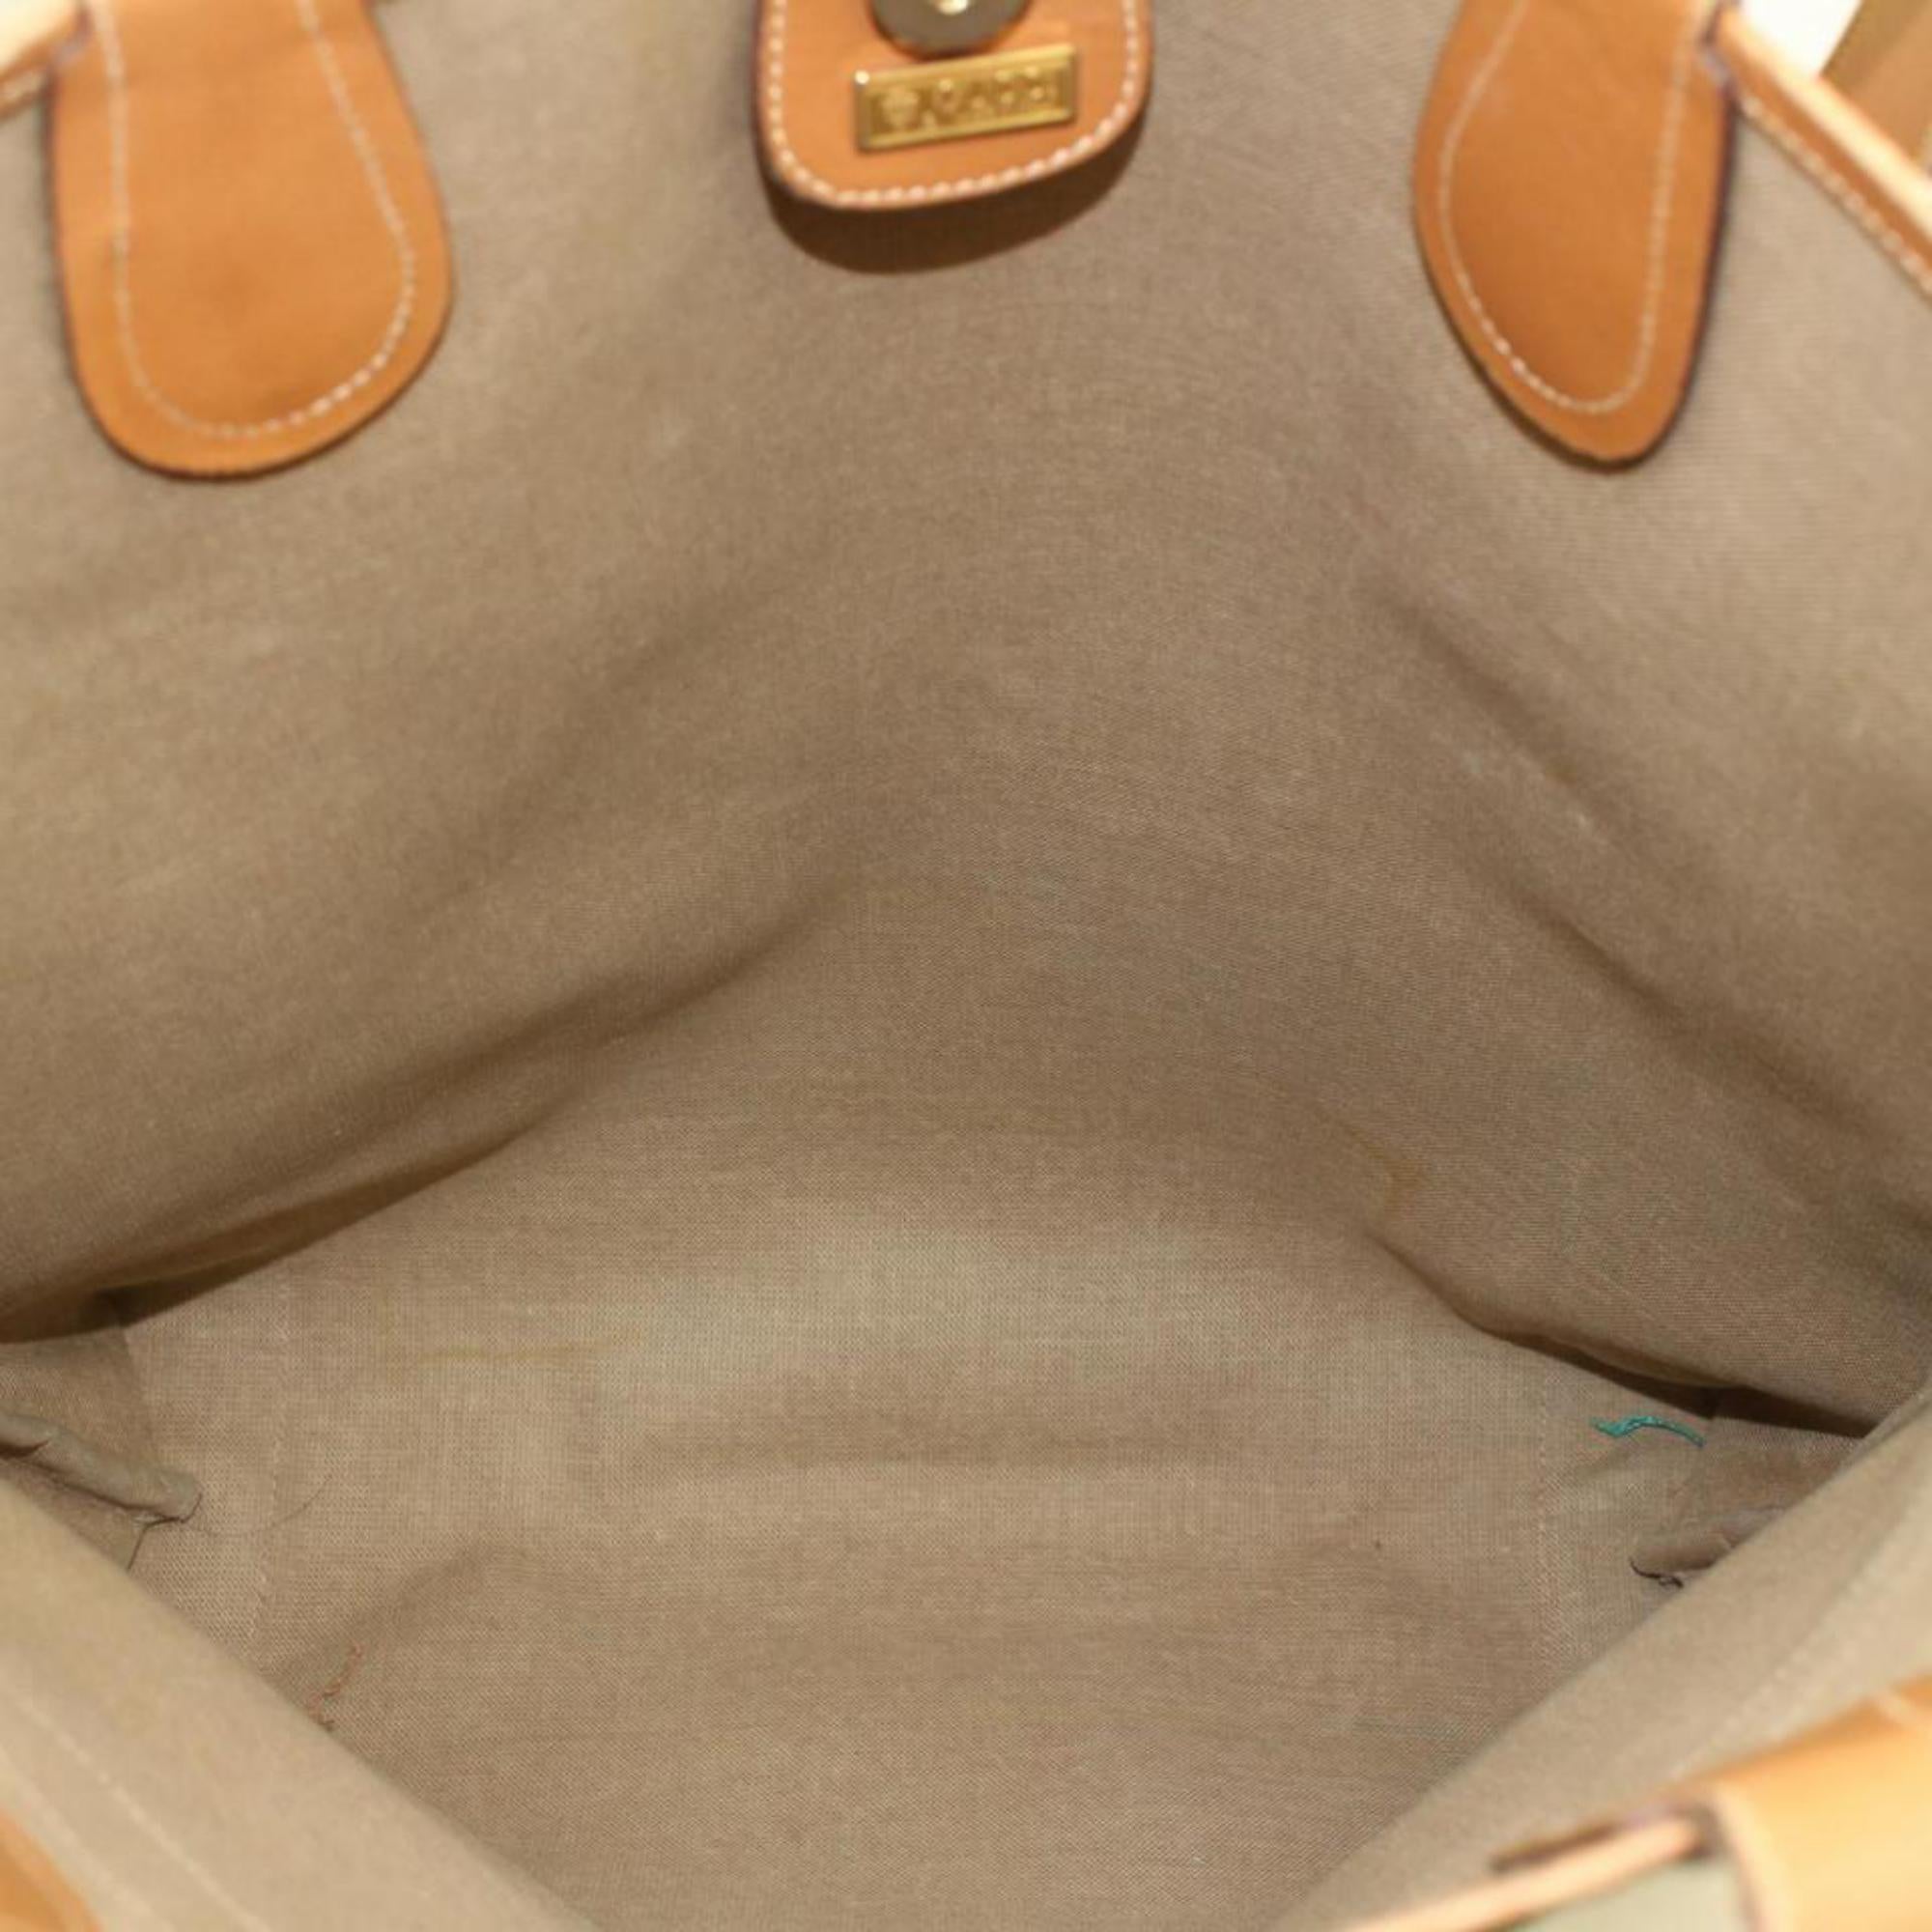 Gucci Supreme Monogram Sherry Large Web Shopper 869788 Beige Coated Canvas Tote In Fair Condition For Sale In Forest Hills, NY